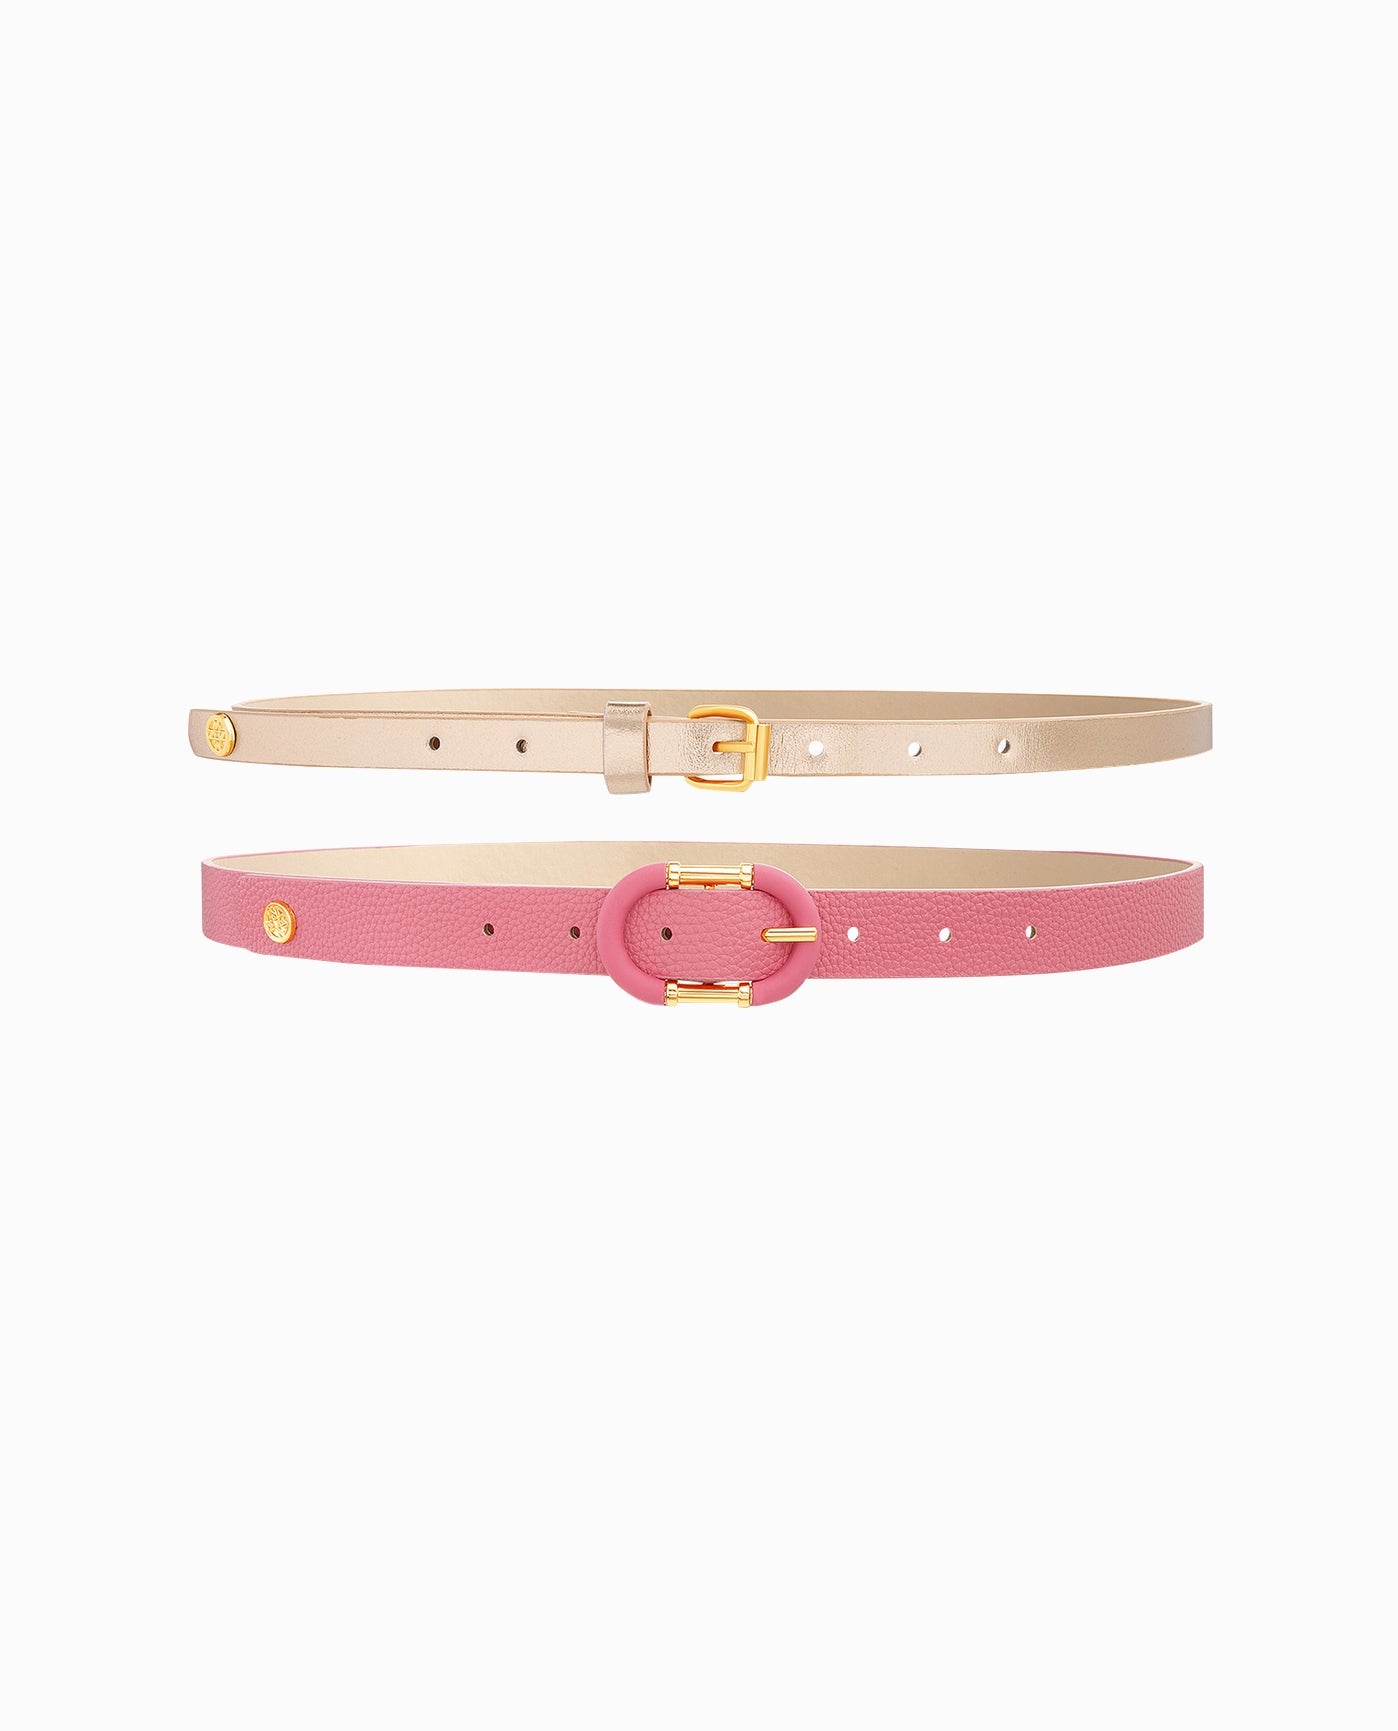 VEGAN LEATHER SKINNY BELT TWO-PIECE SET | Pink and Gold